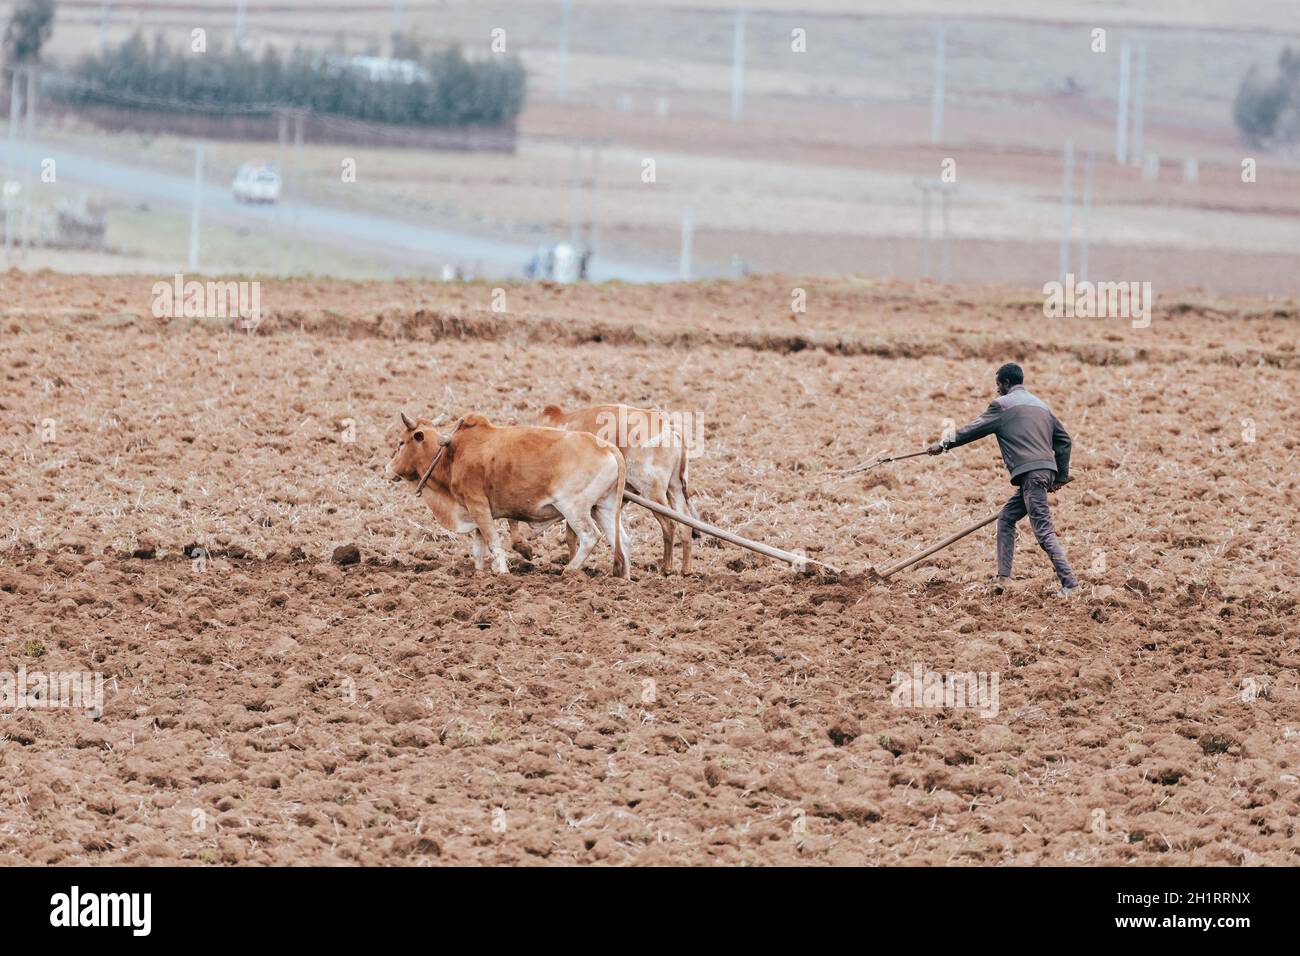 OROMIA REGION, ETHIOPIA, APRIL 19.2019, Unknown Ethiopian farmer cultivates a field with a traditional primitive wooden plow pulled by cows on April 1 Stock Photo